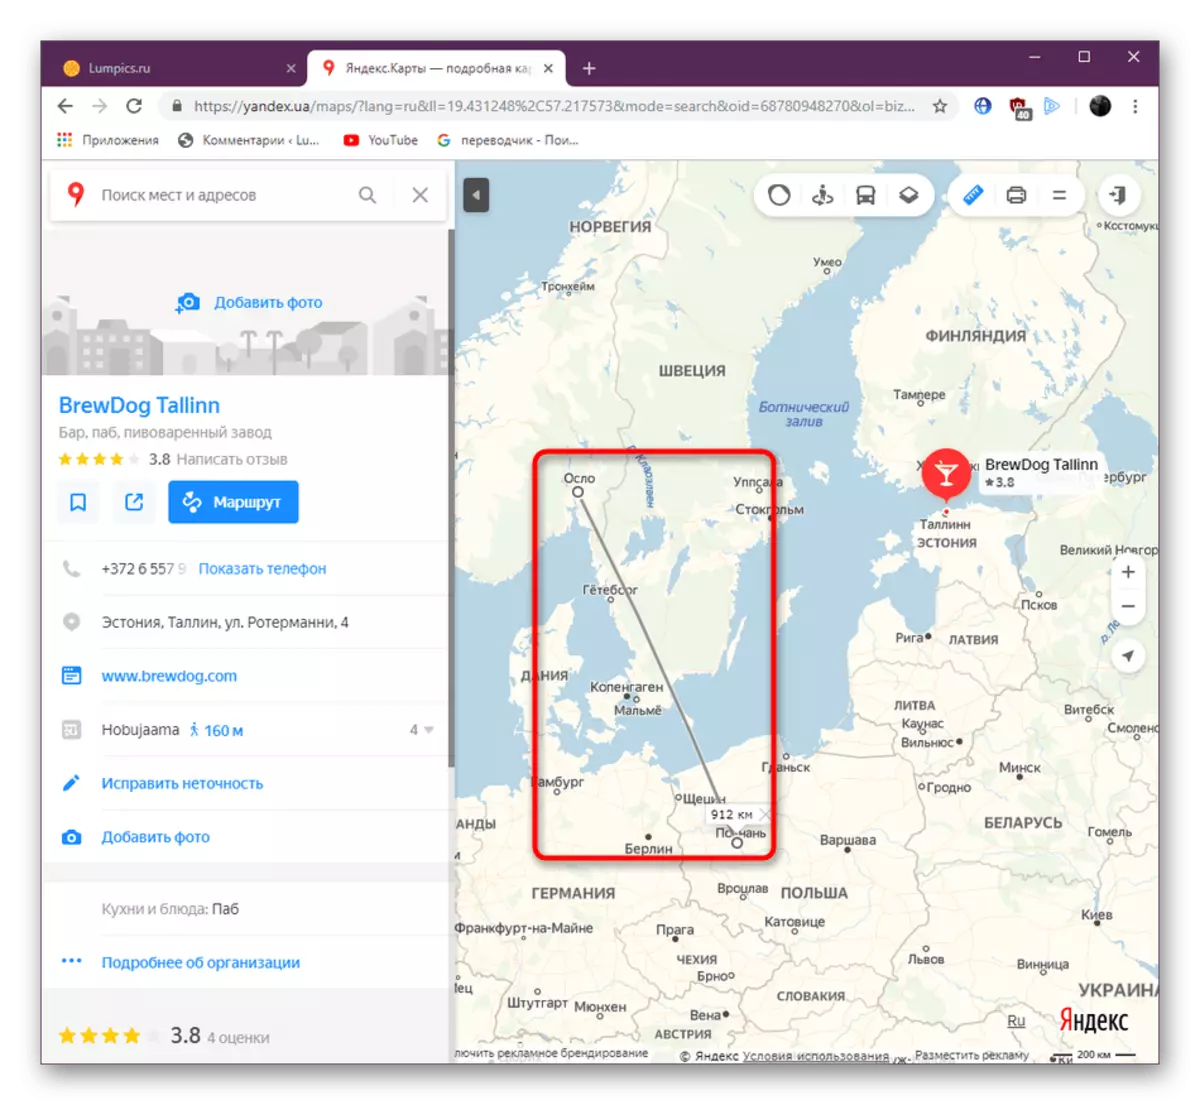 Measurement of the distance of any scale using the line on the Yandex.Maps website